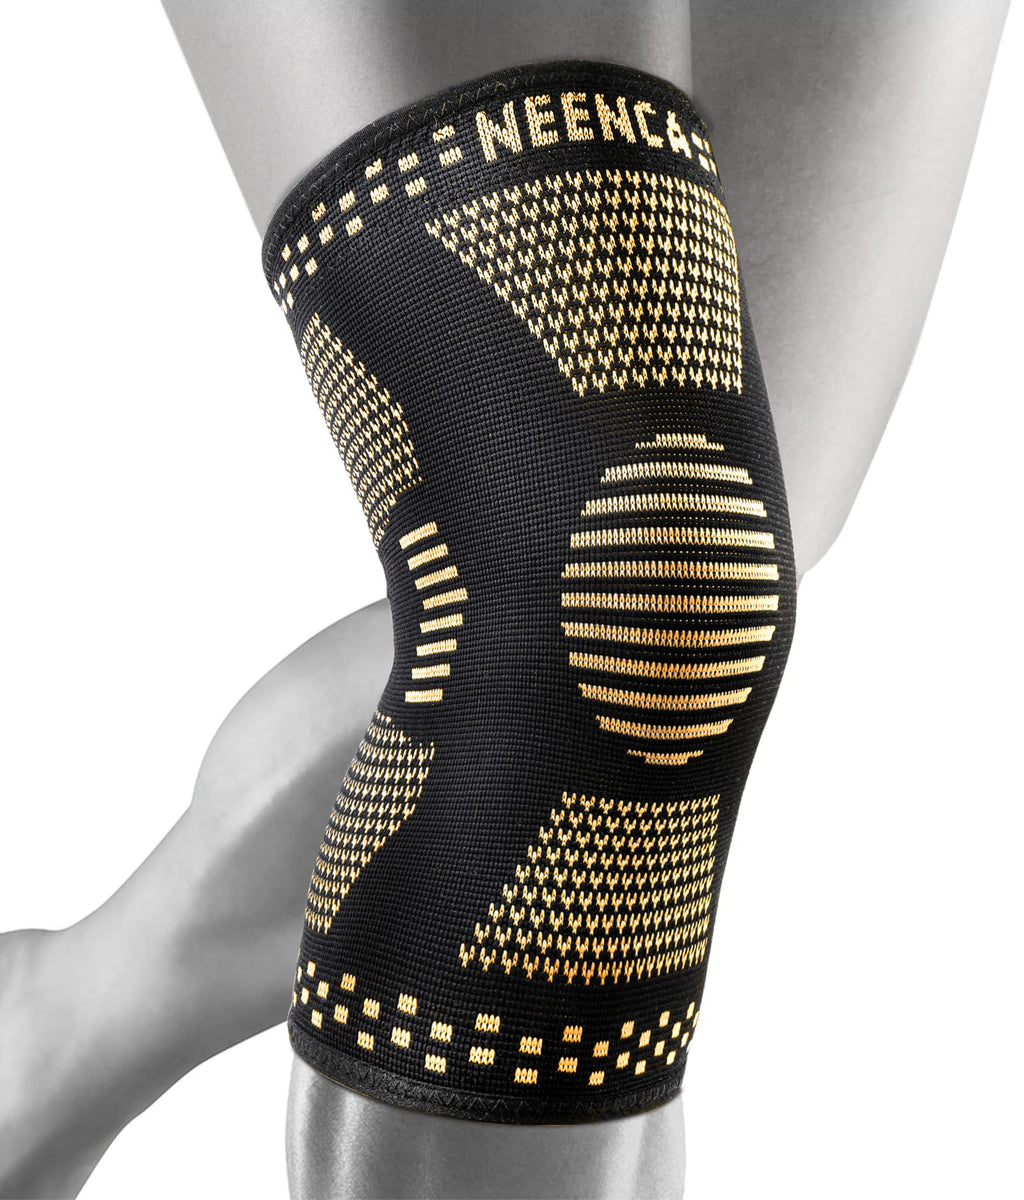 [Australia] - NEENCA Copper Knee Sleeves (Pair), Professional Knee Brace with Copper Ions Infused Fiber Technology, Premium Compression Support for Knee Pain, Sports, Workout, Arthritis, ACL, Joint Pain Relief... Large Real Copper Ions（2 pack） 